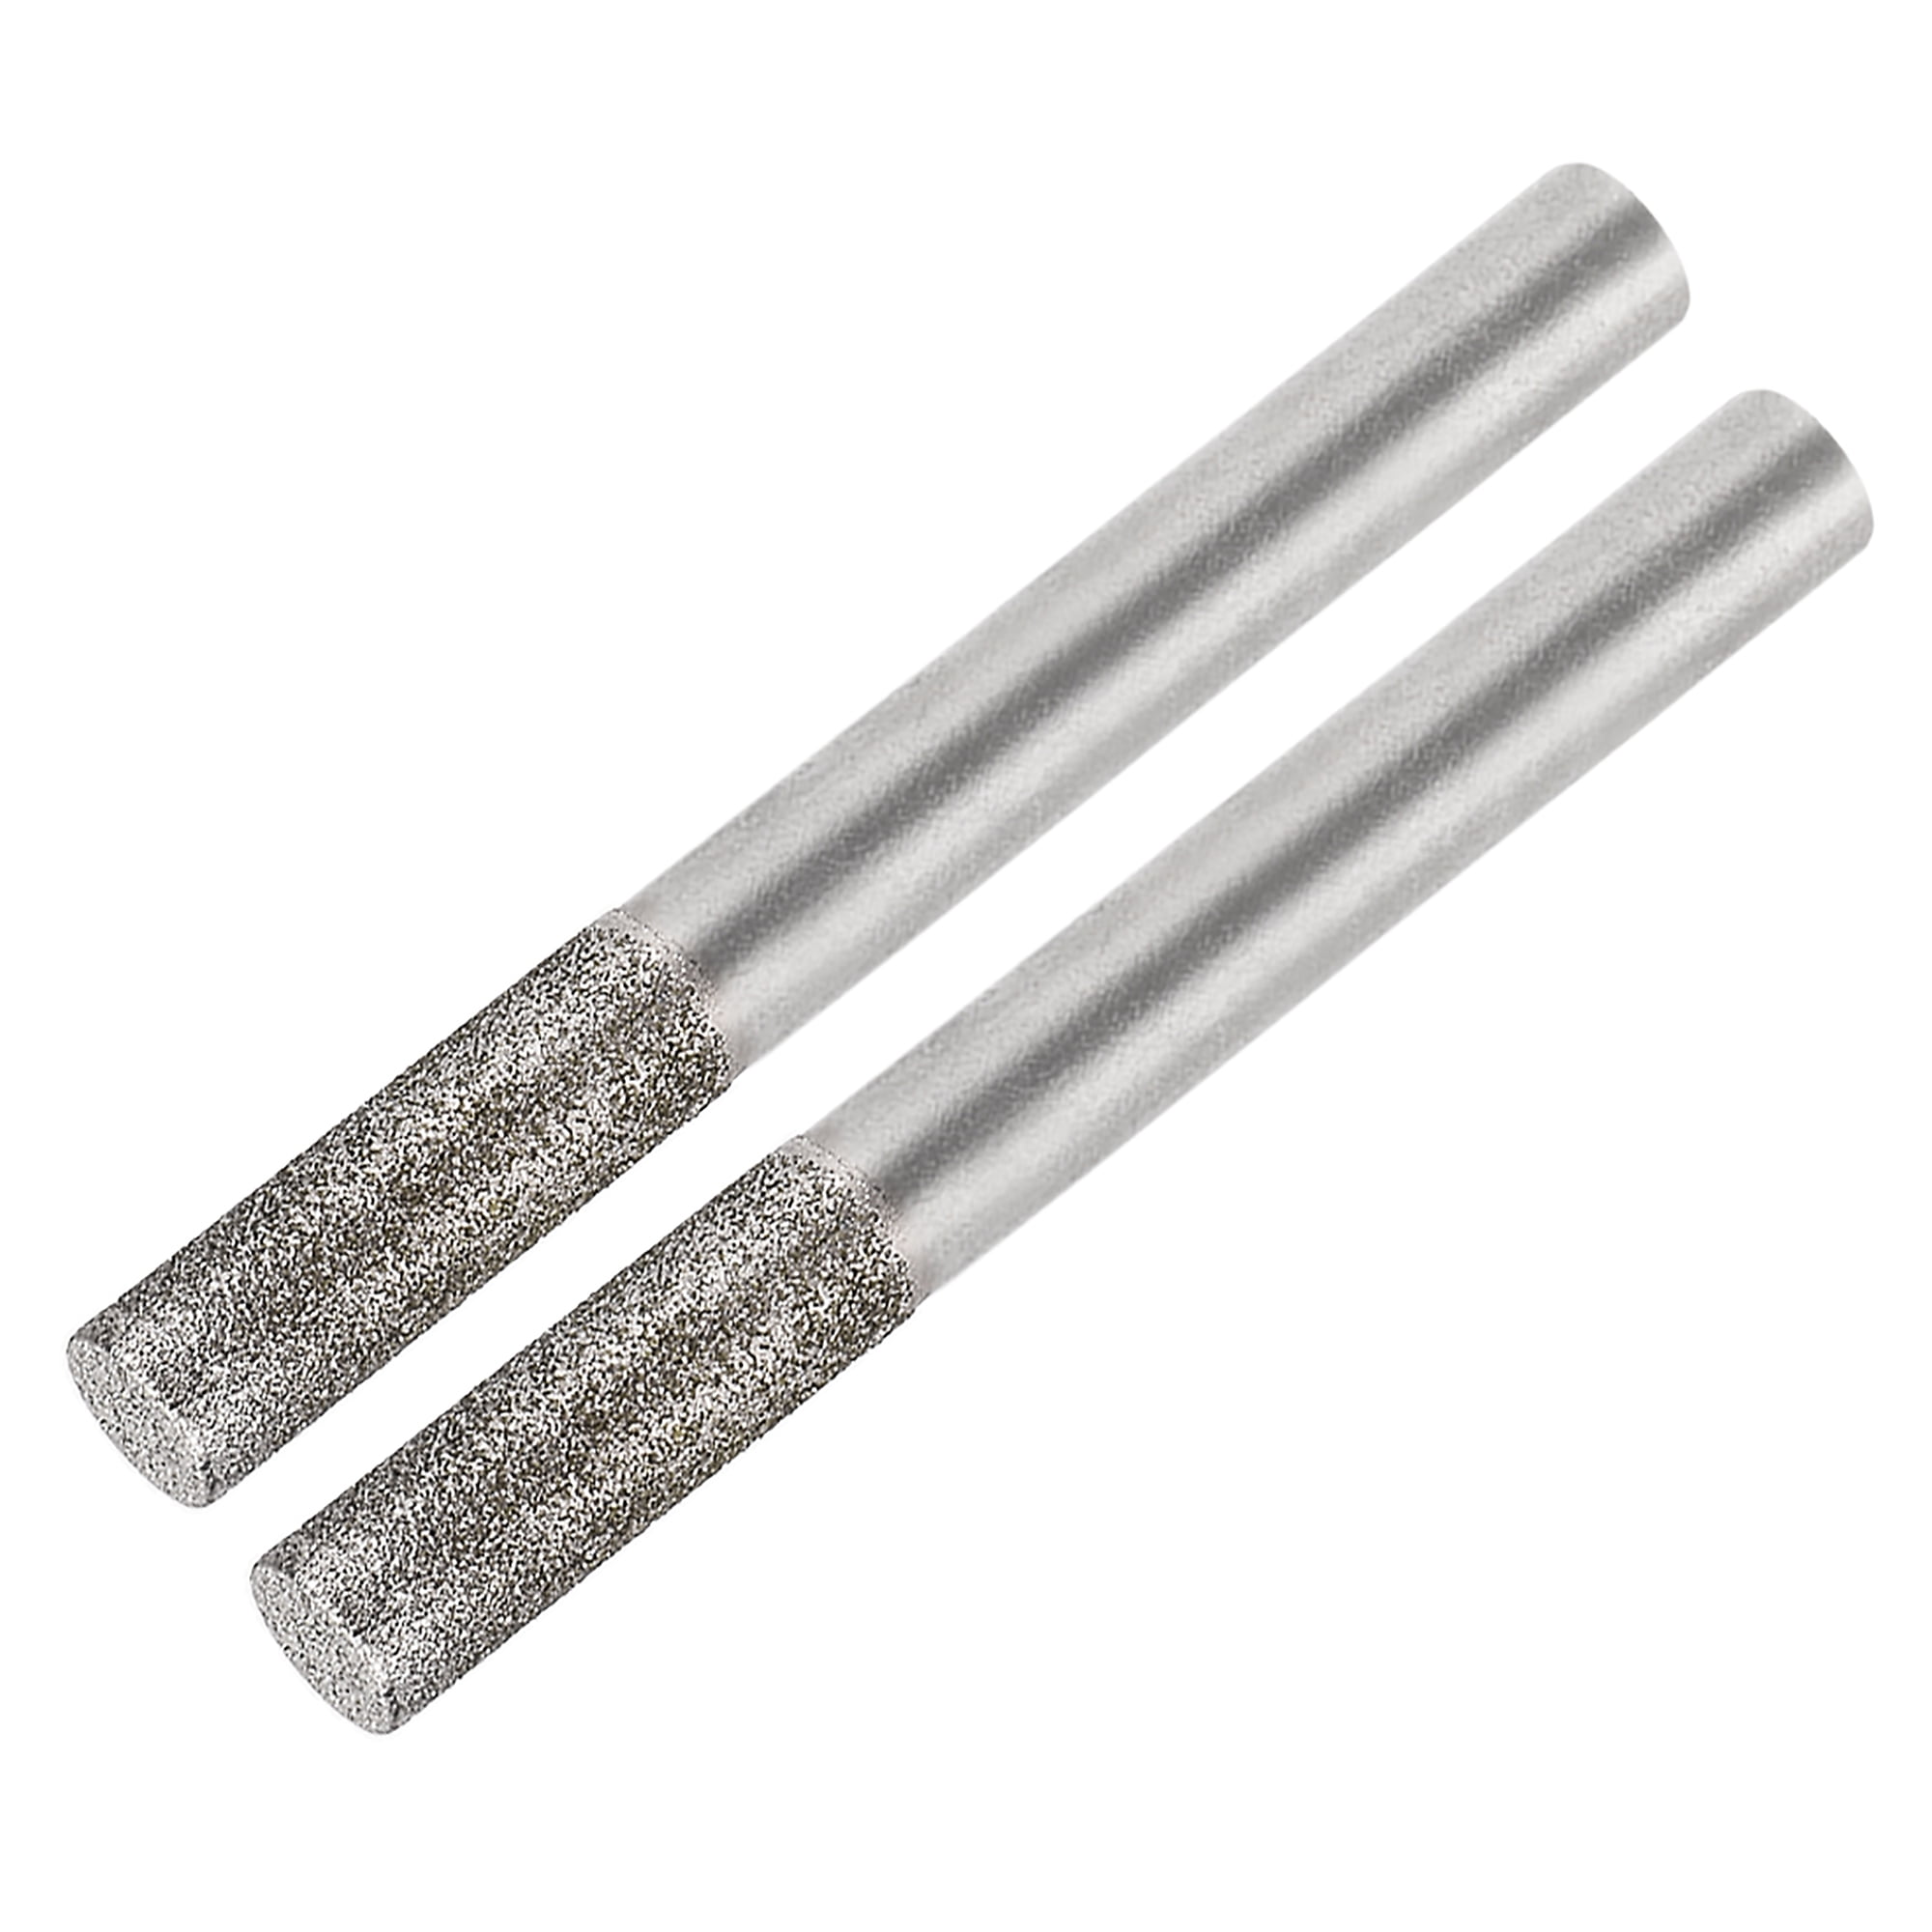 Diamond Burrs Grinding Drill Bits for Rotary Tool 1/4-Inch Shank 6mm ...